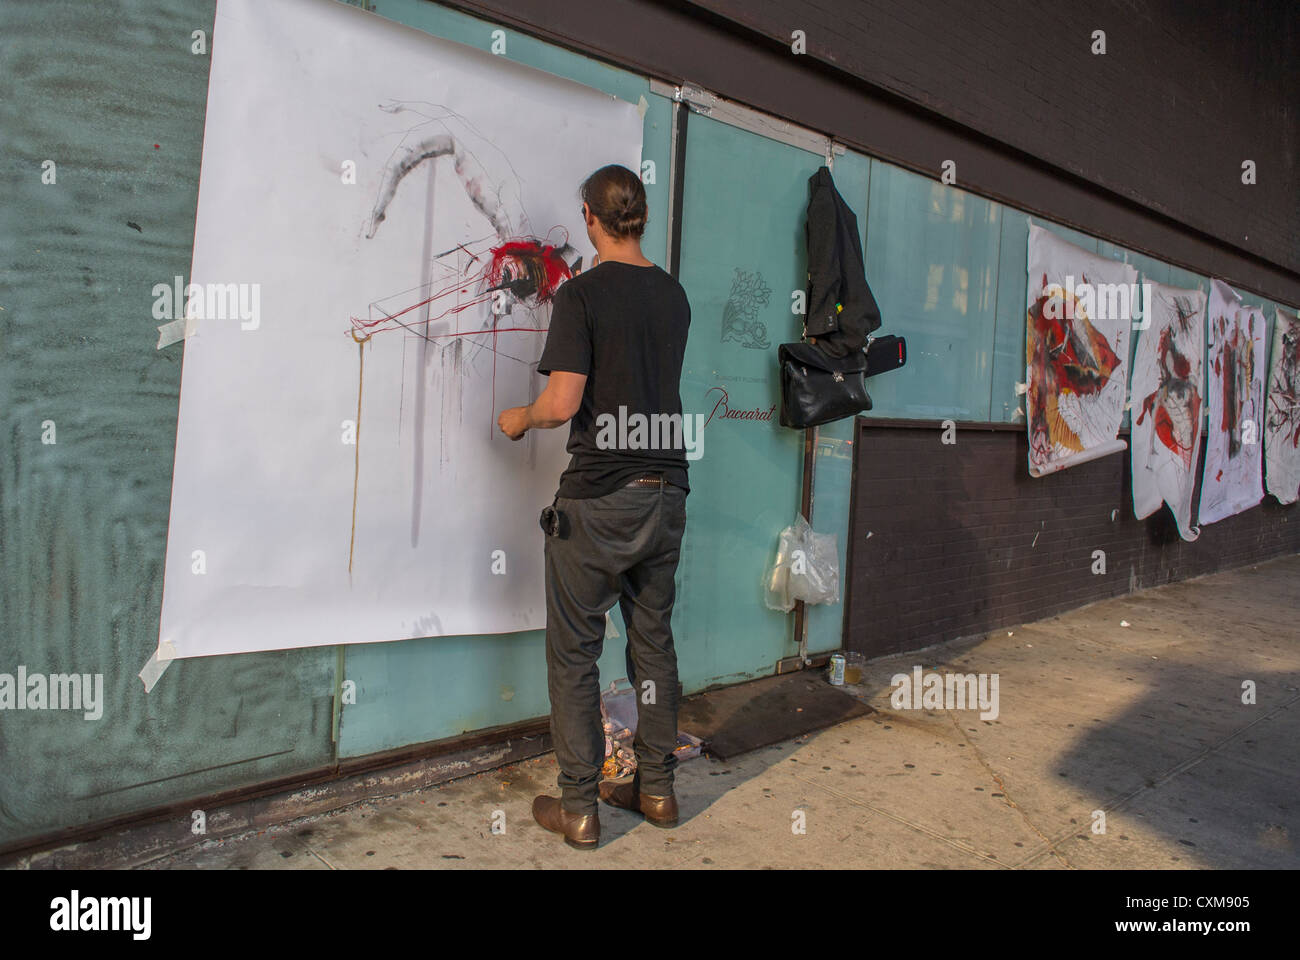 New York City, New York, Stati Uniti, Man from Behind, Street Artist Painting on Wall, Scenes in the Meatpacking District, Public Art New york City colorata Foto Stock